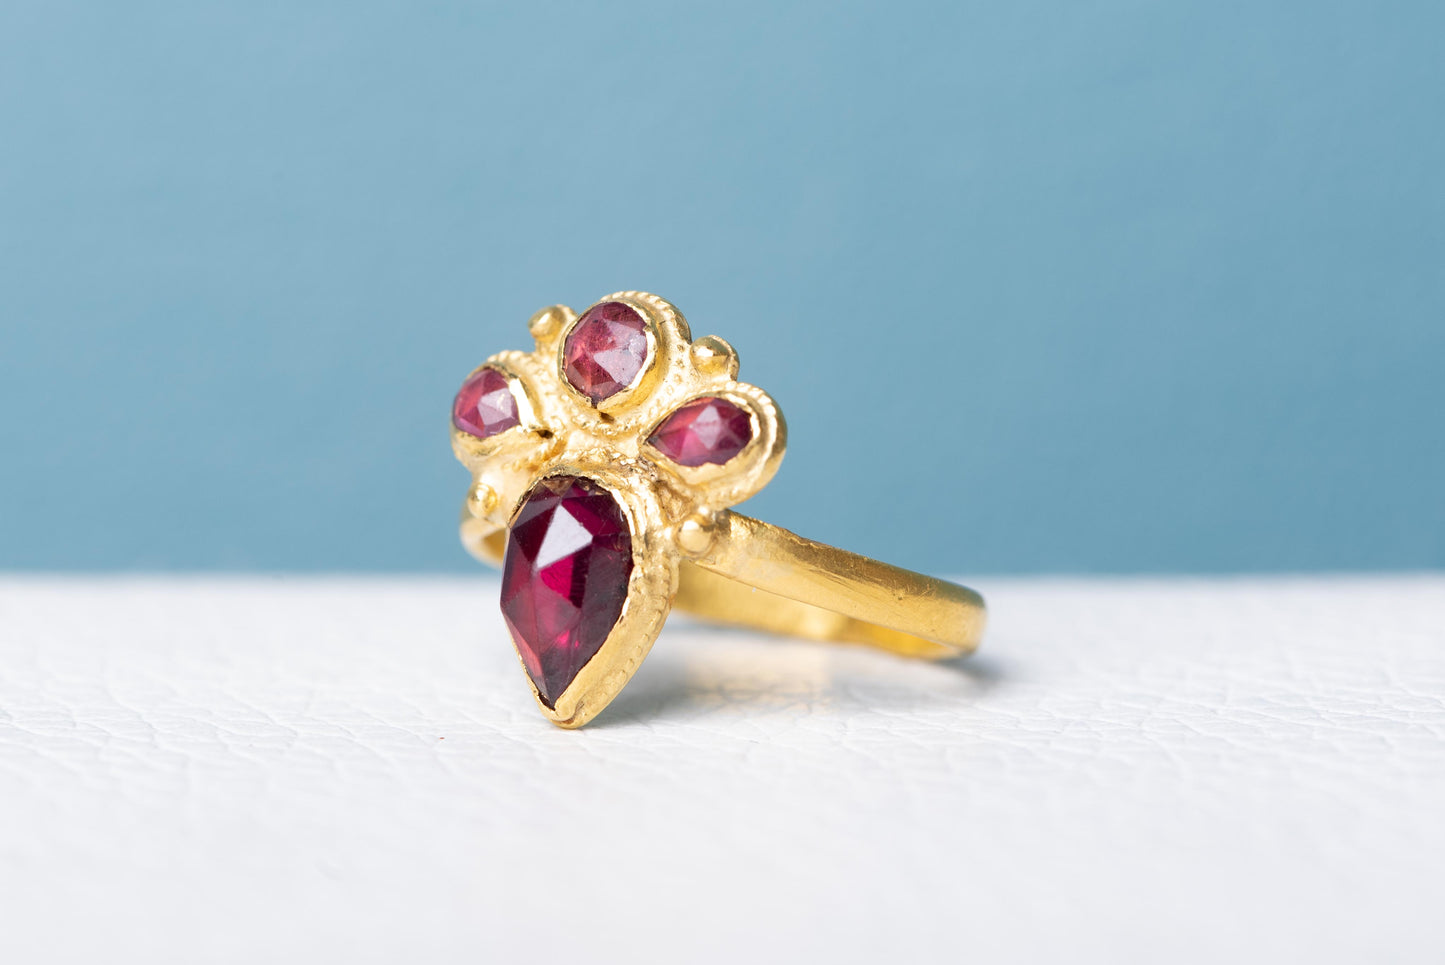 Layaway 25% Second Payment: Late Baroque Garnet Ring